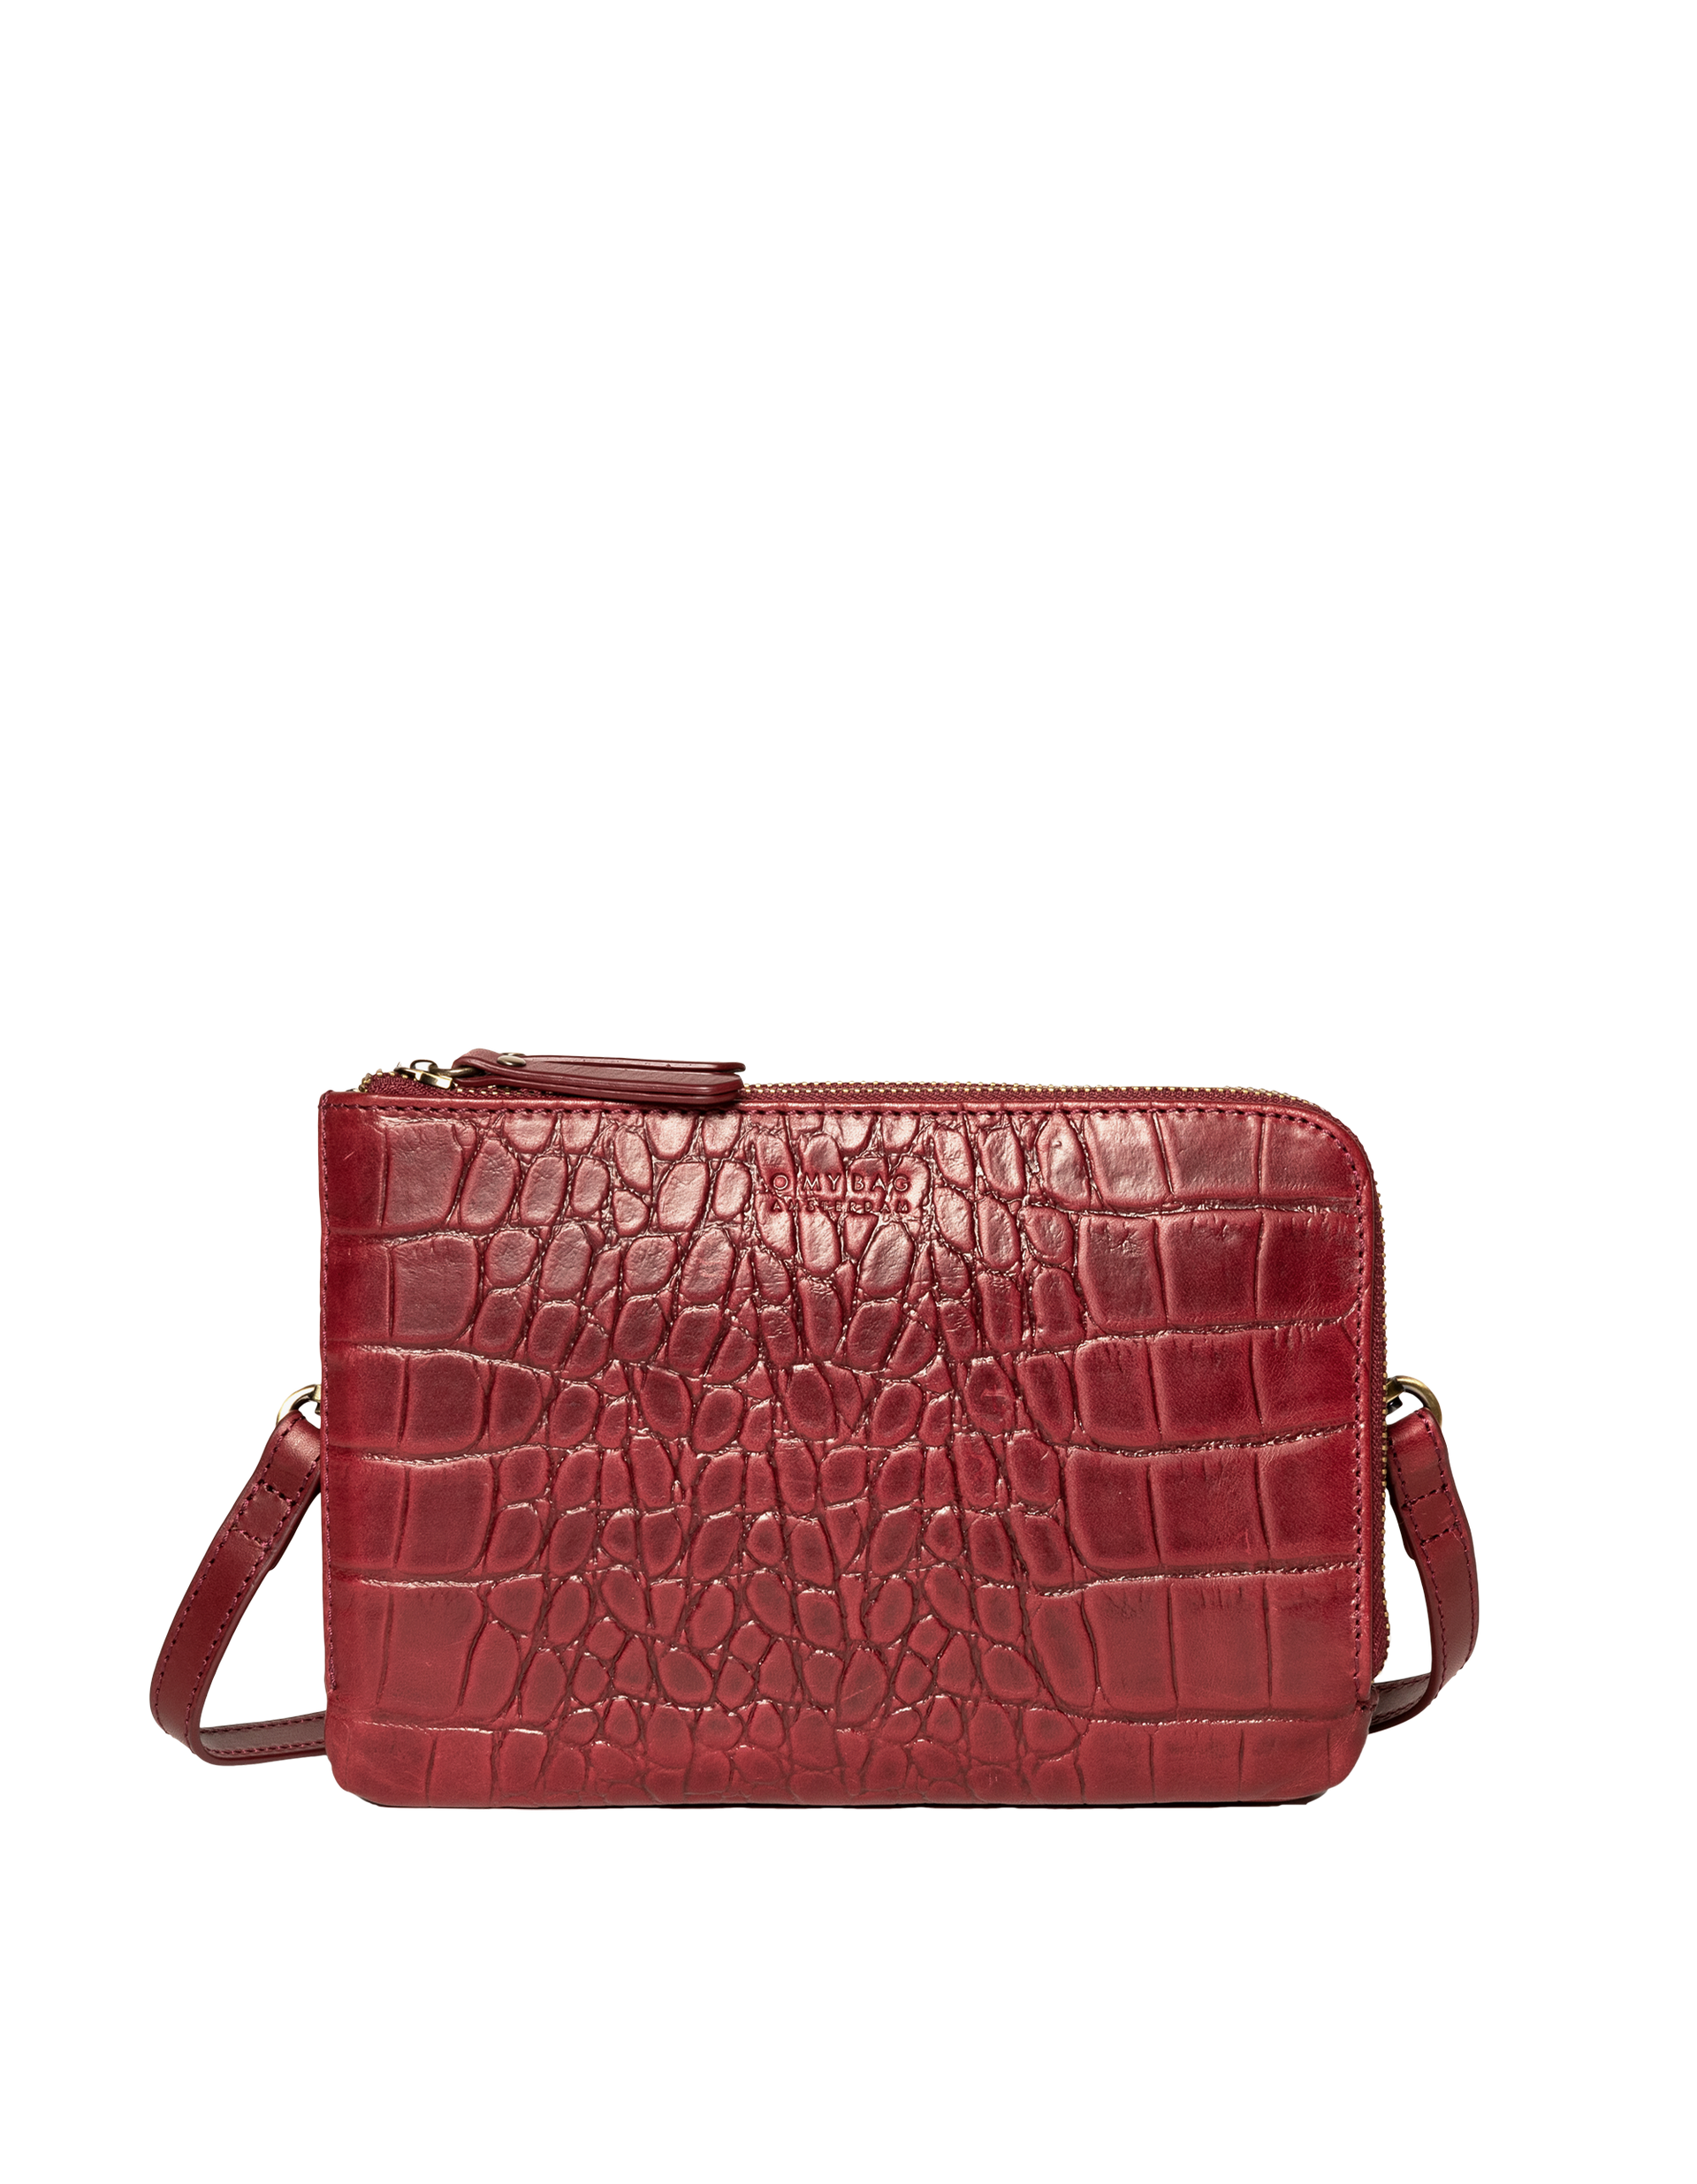 Lola Ruby Classic Croco Leather. Small Rectangular crossbody clutch bag for women with two zipper compartments. Front product image.